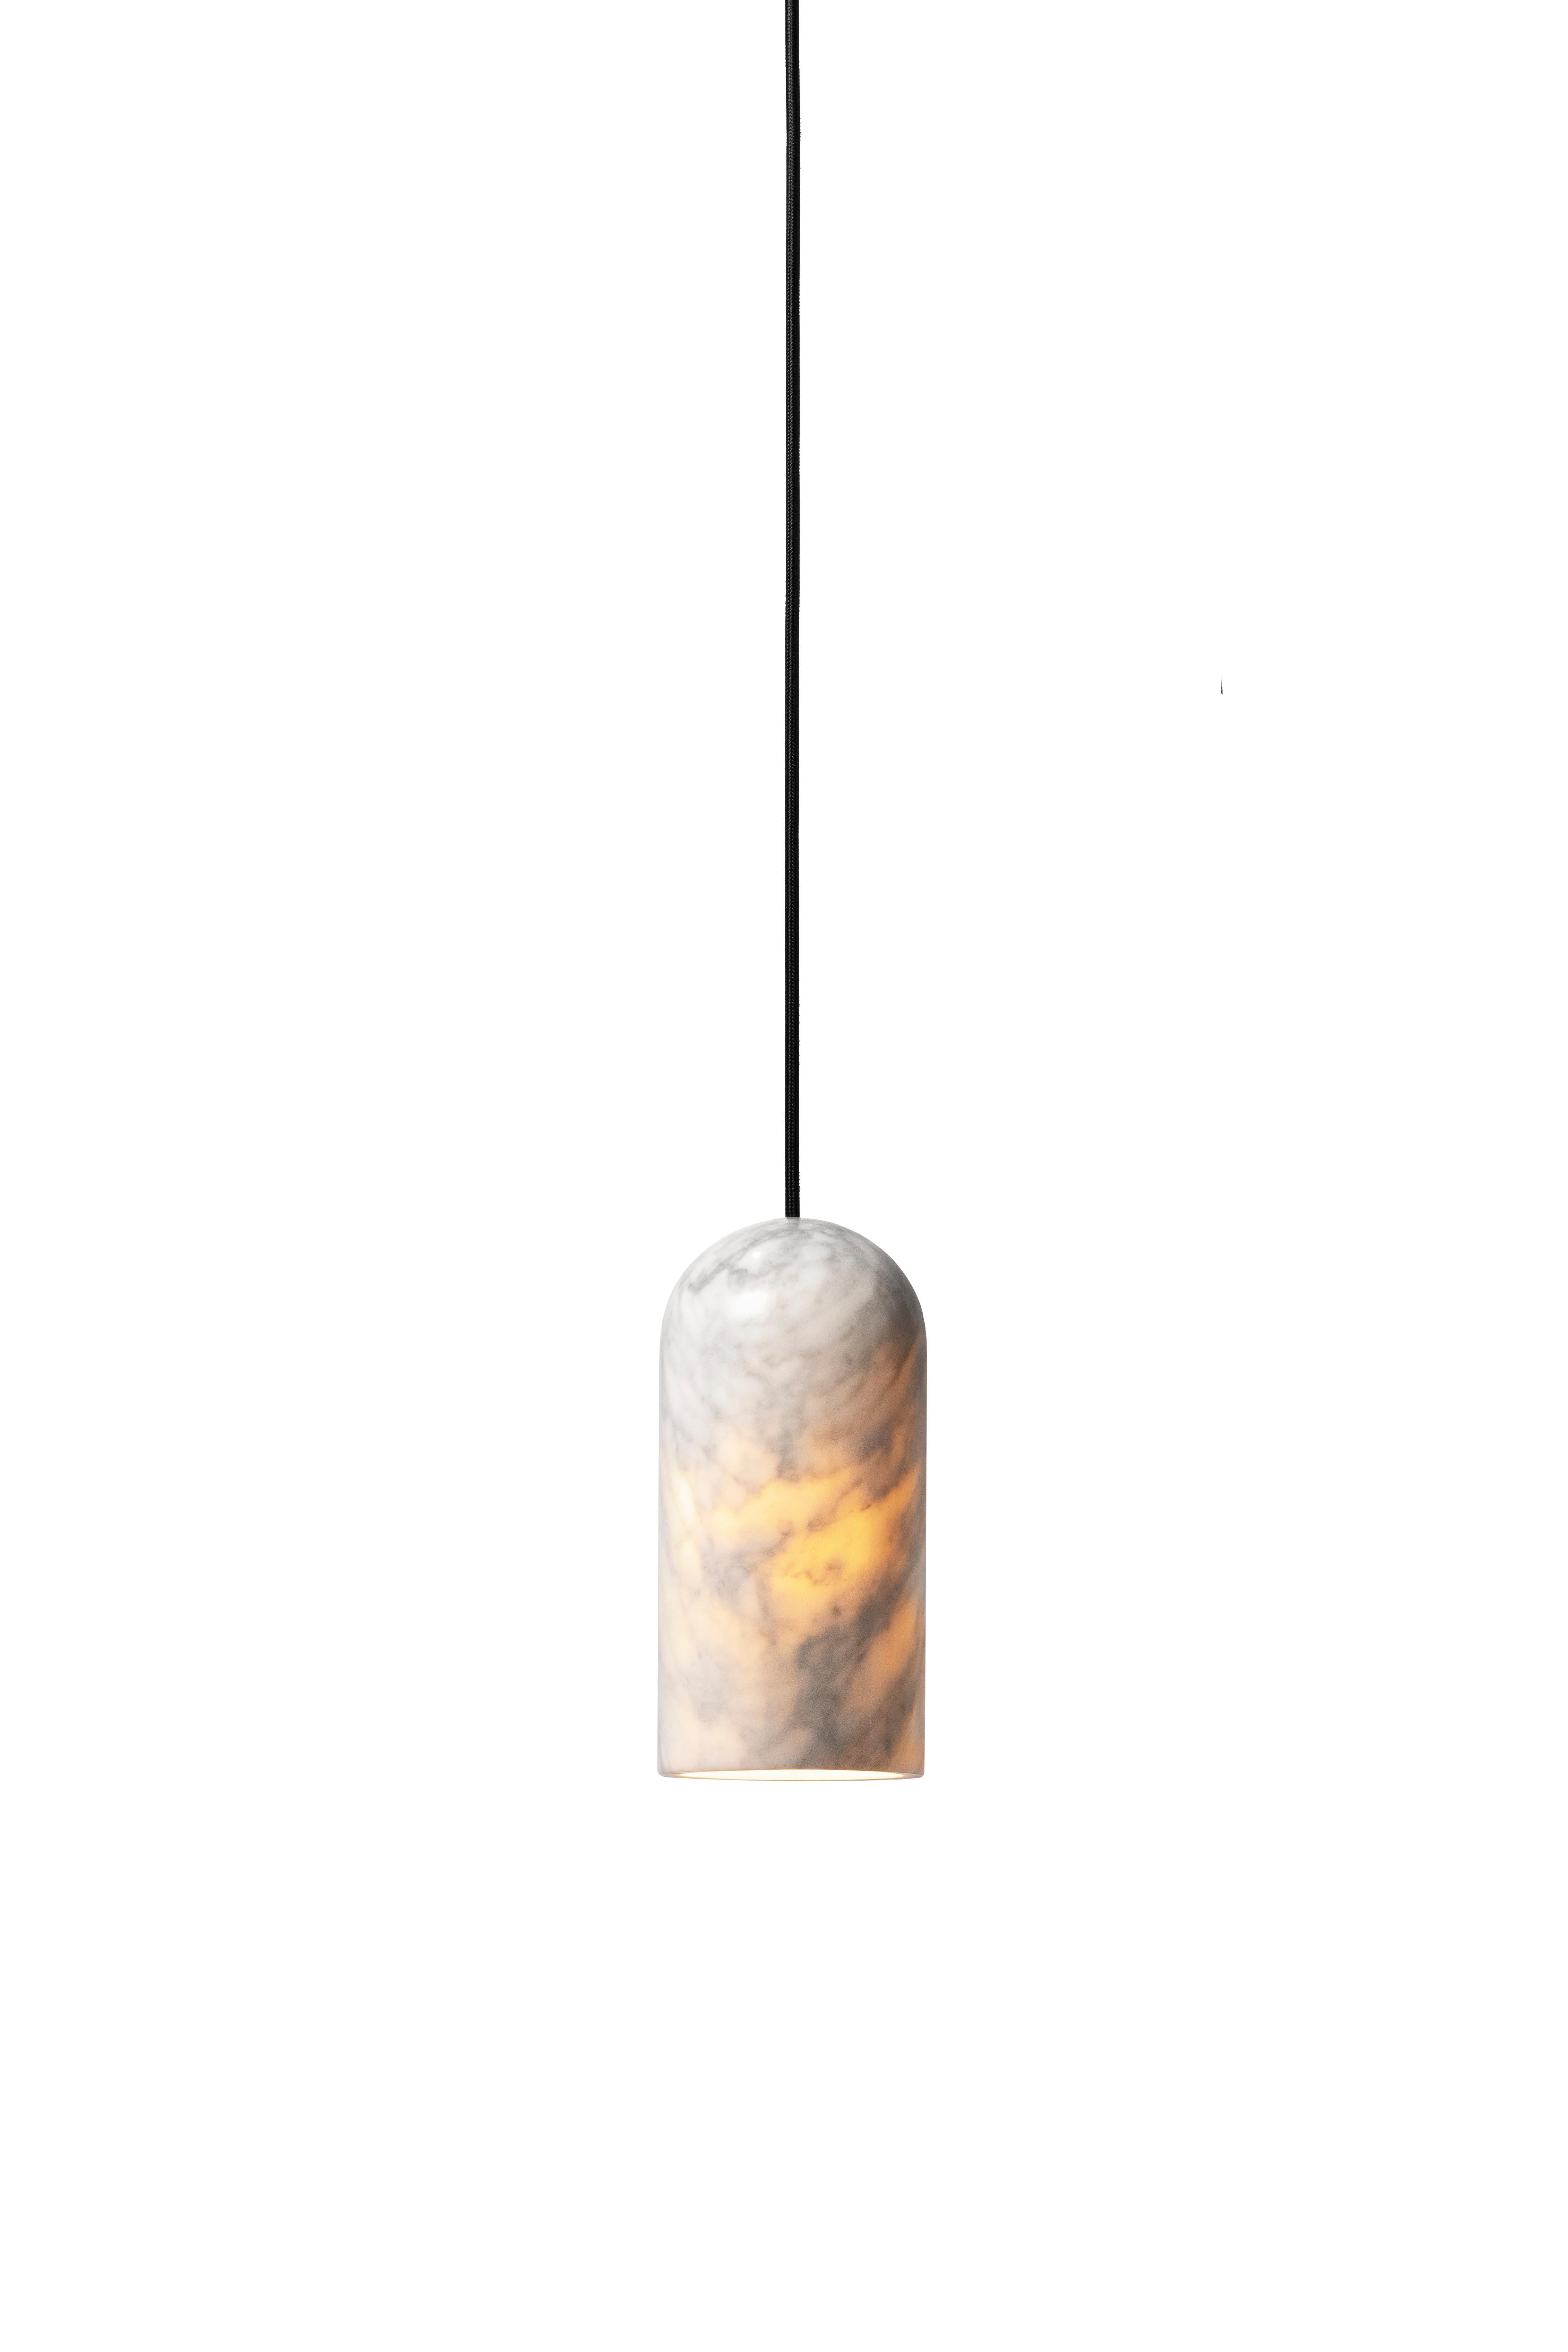 Material: Venato Carrara
Fittings: Black Aluminum
Color: White
Dimension: 110 x 110 x 230 mm
Weight: 2.2 kg
Cord: 3000 mm
Light Source: LED E27
CCT: 2700 K
CRI: 80 Ra
Flux: 250 lm
Supply: 220 - 240 V
Wattage: 3 W

About the Artist/